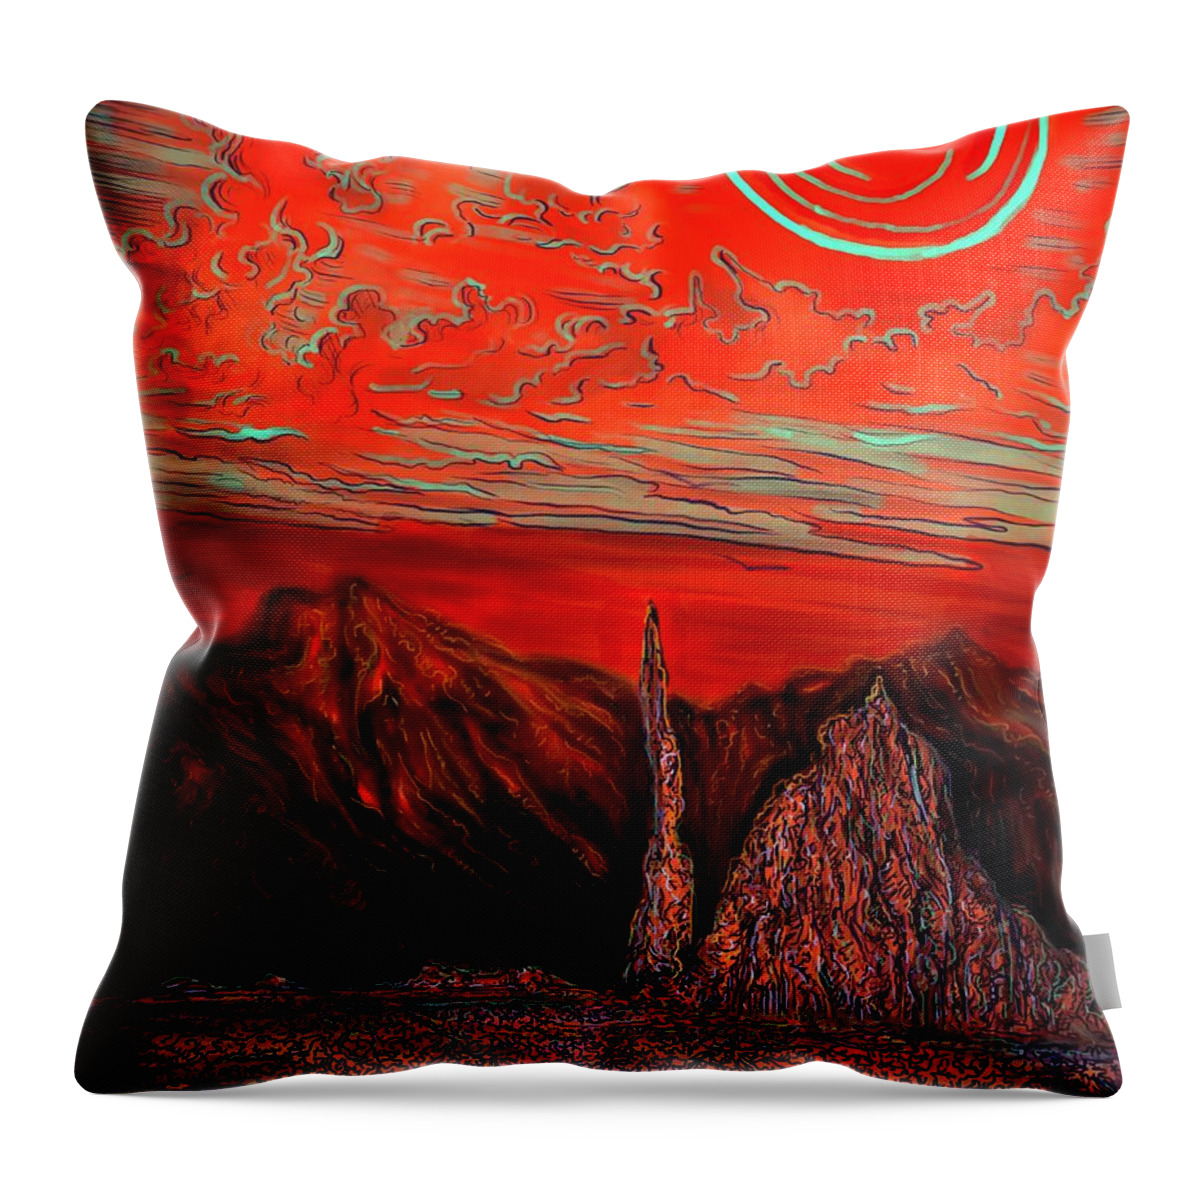 Landscape Throw Pillow featuring the digital art Liminal by Angela Weddle